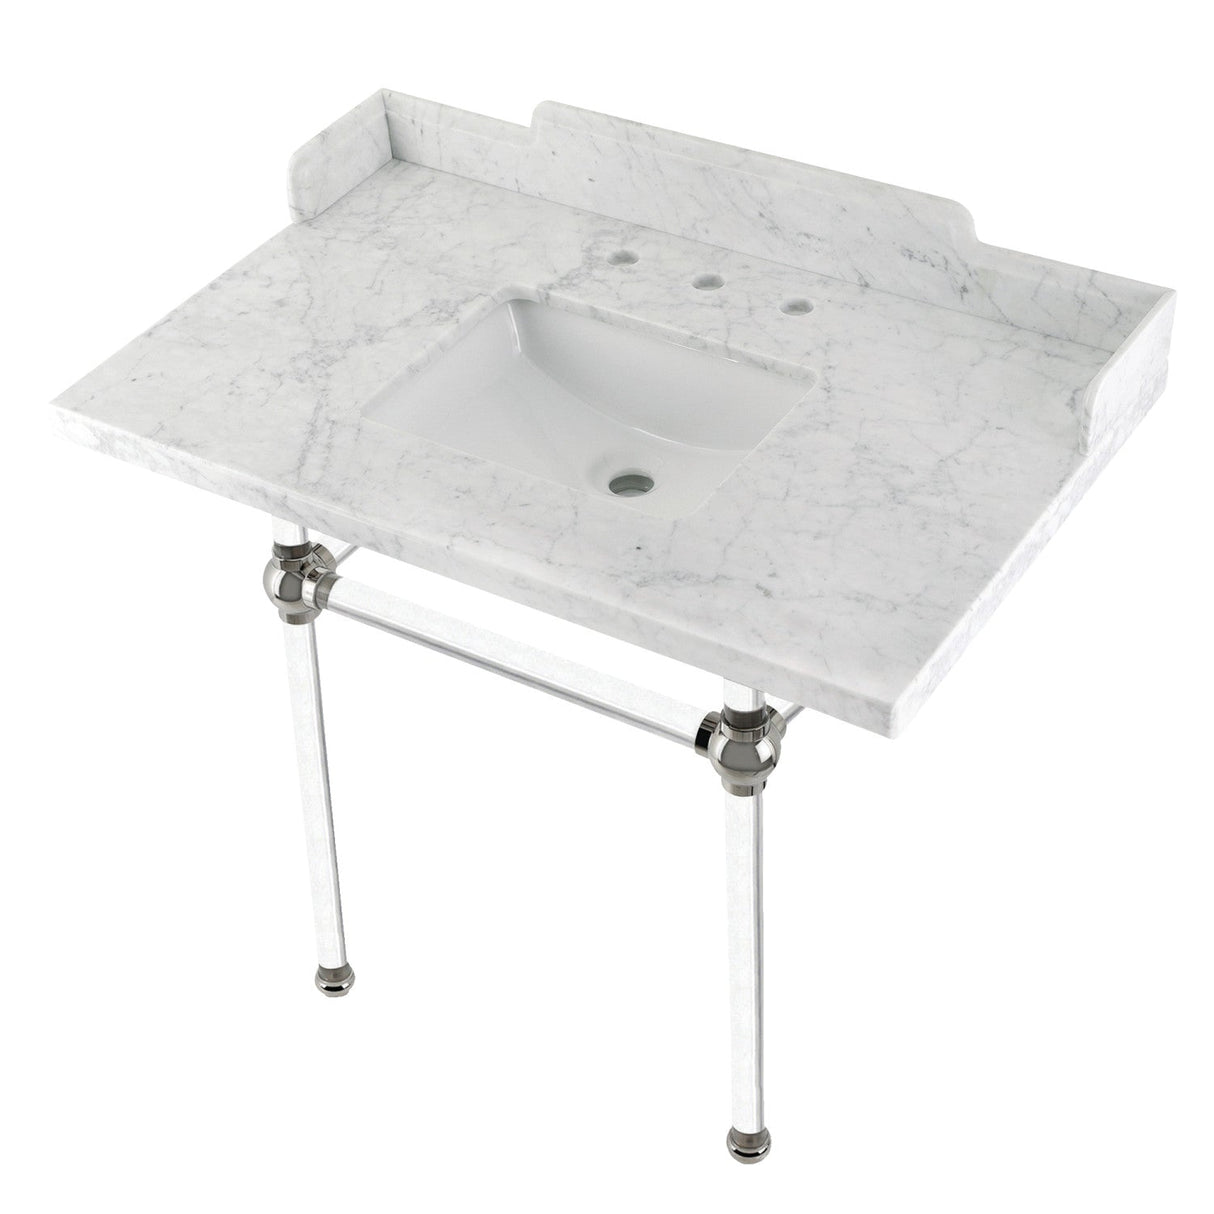 Fauceture LMS3630MASQ6 36-Inch Carrara Marble Console Sink with Acrylic Legs, Marble White/Polished Nickel